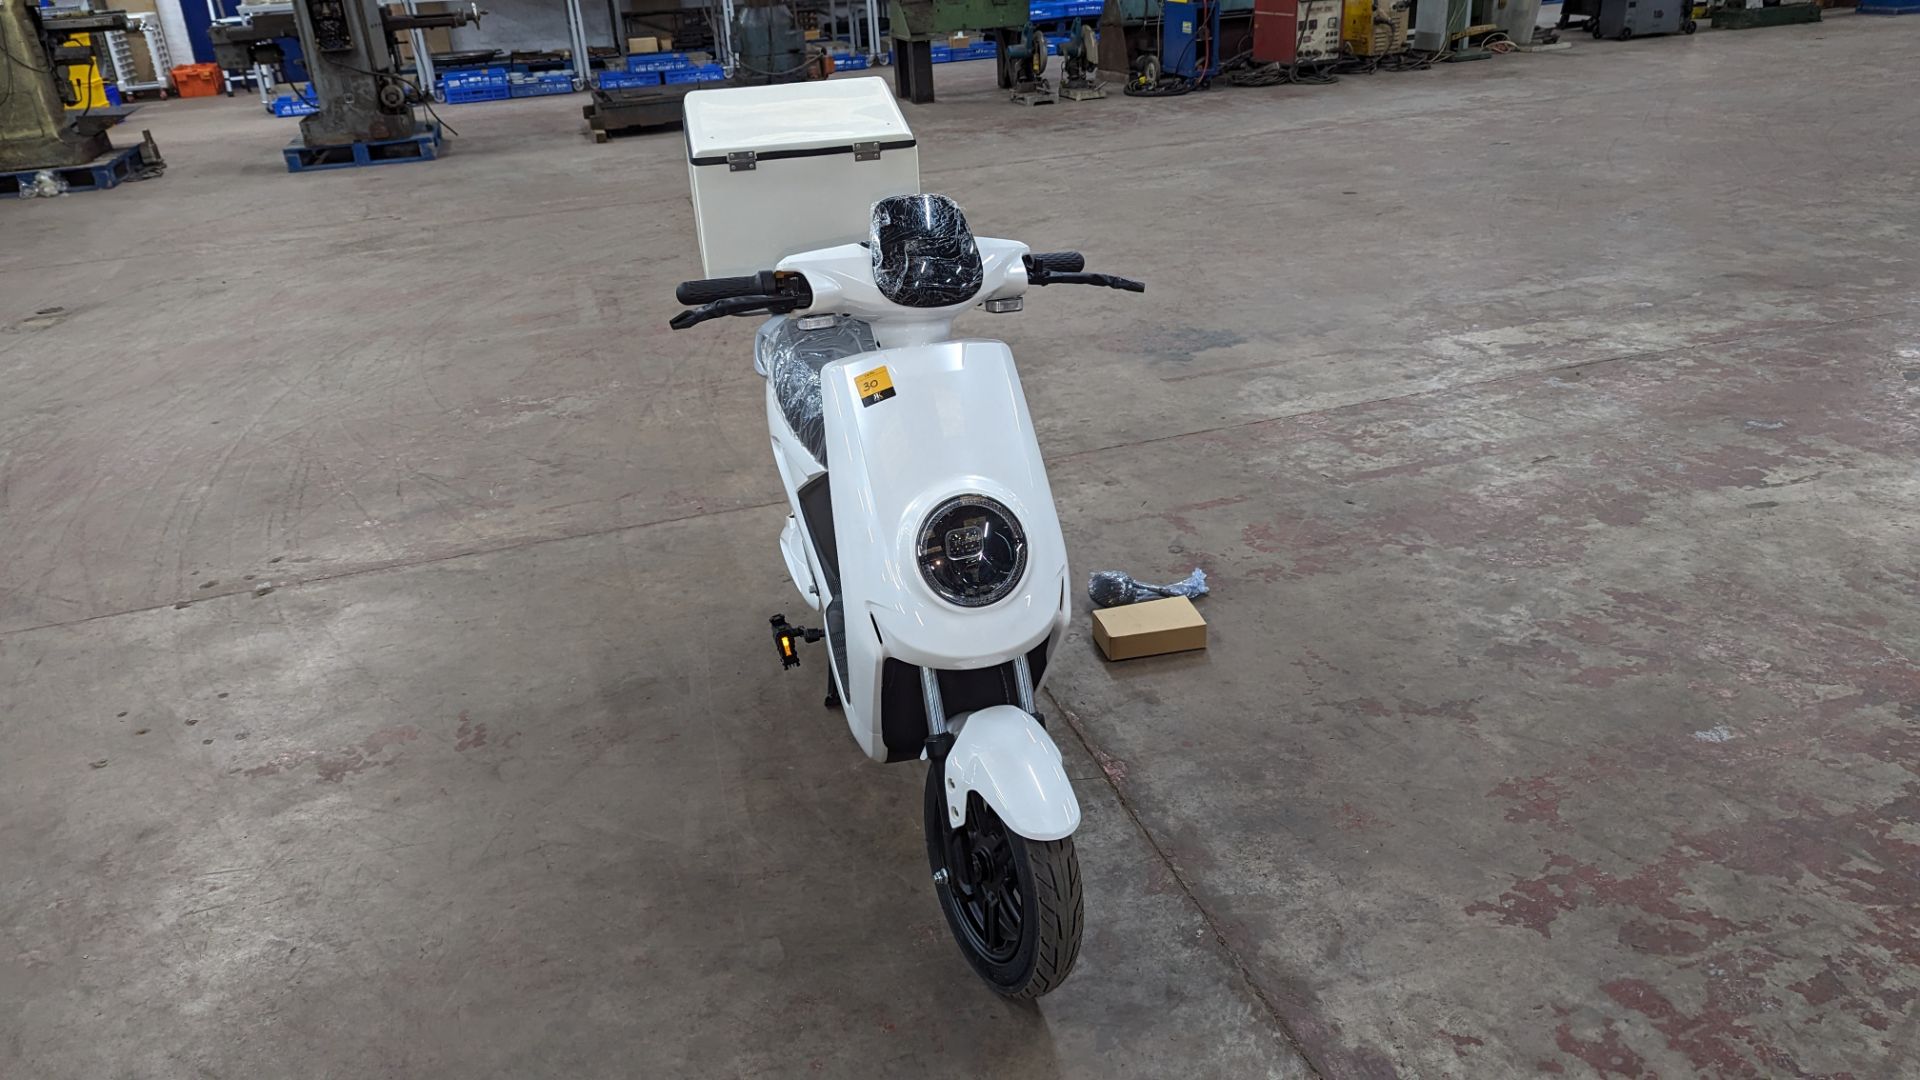 Model 18 Electric Bike: Zero (0) recorded miles, white body with black detailing, insulated box moun - Image 8 of 16